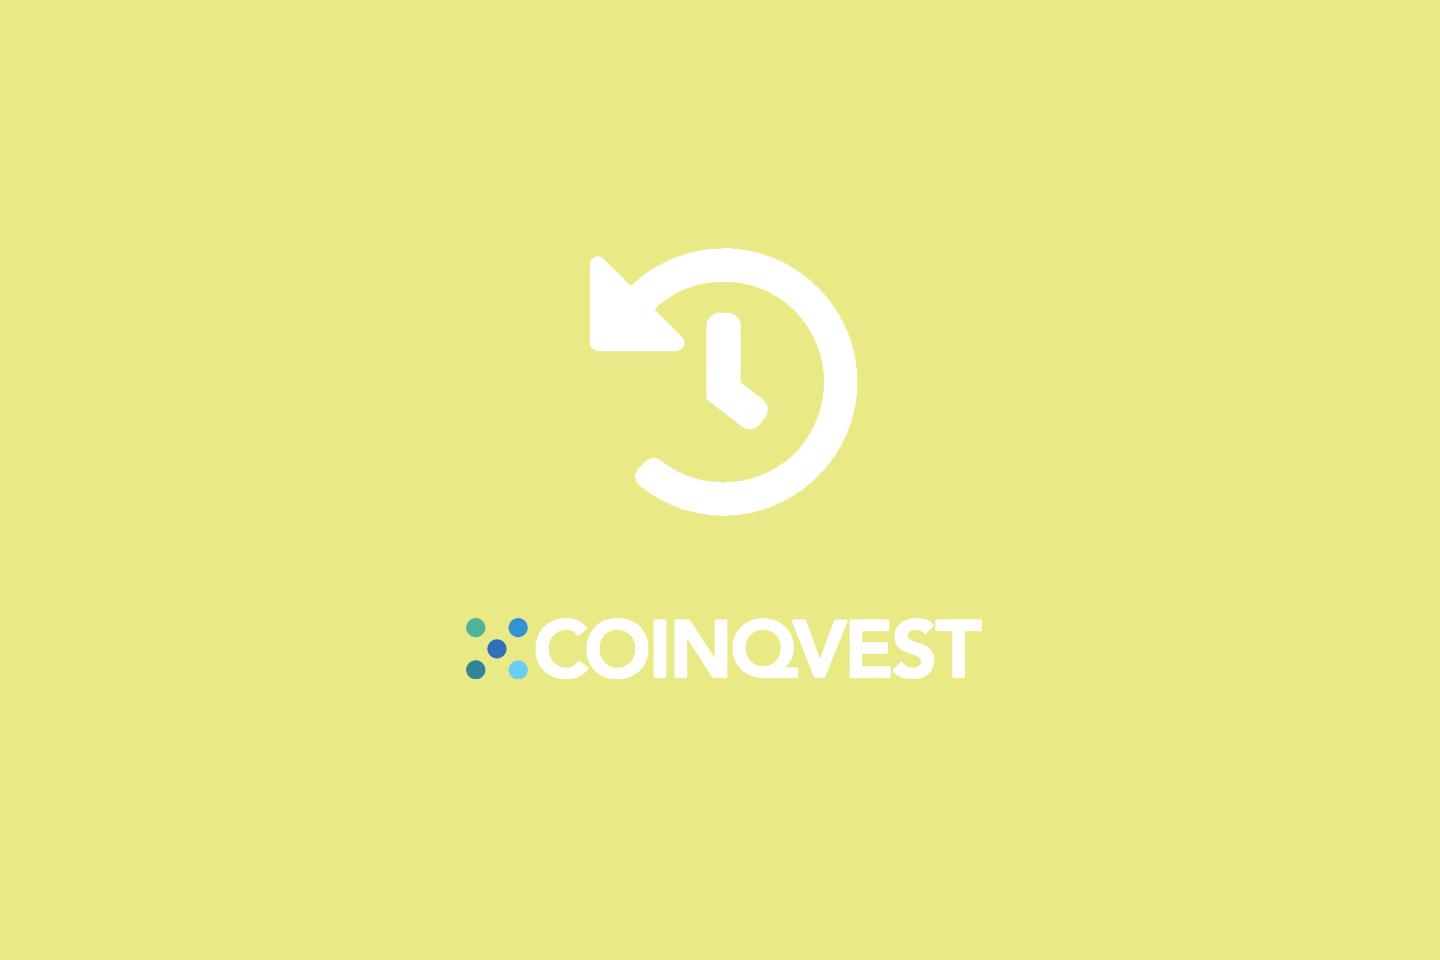 Introduction to Cryptocurrency Payment Refunds with COINQVEST